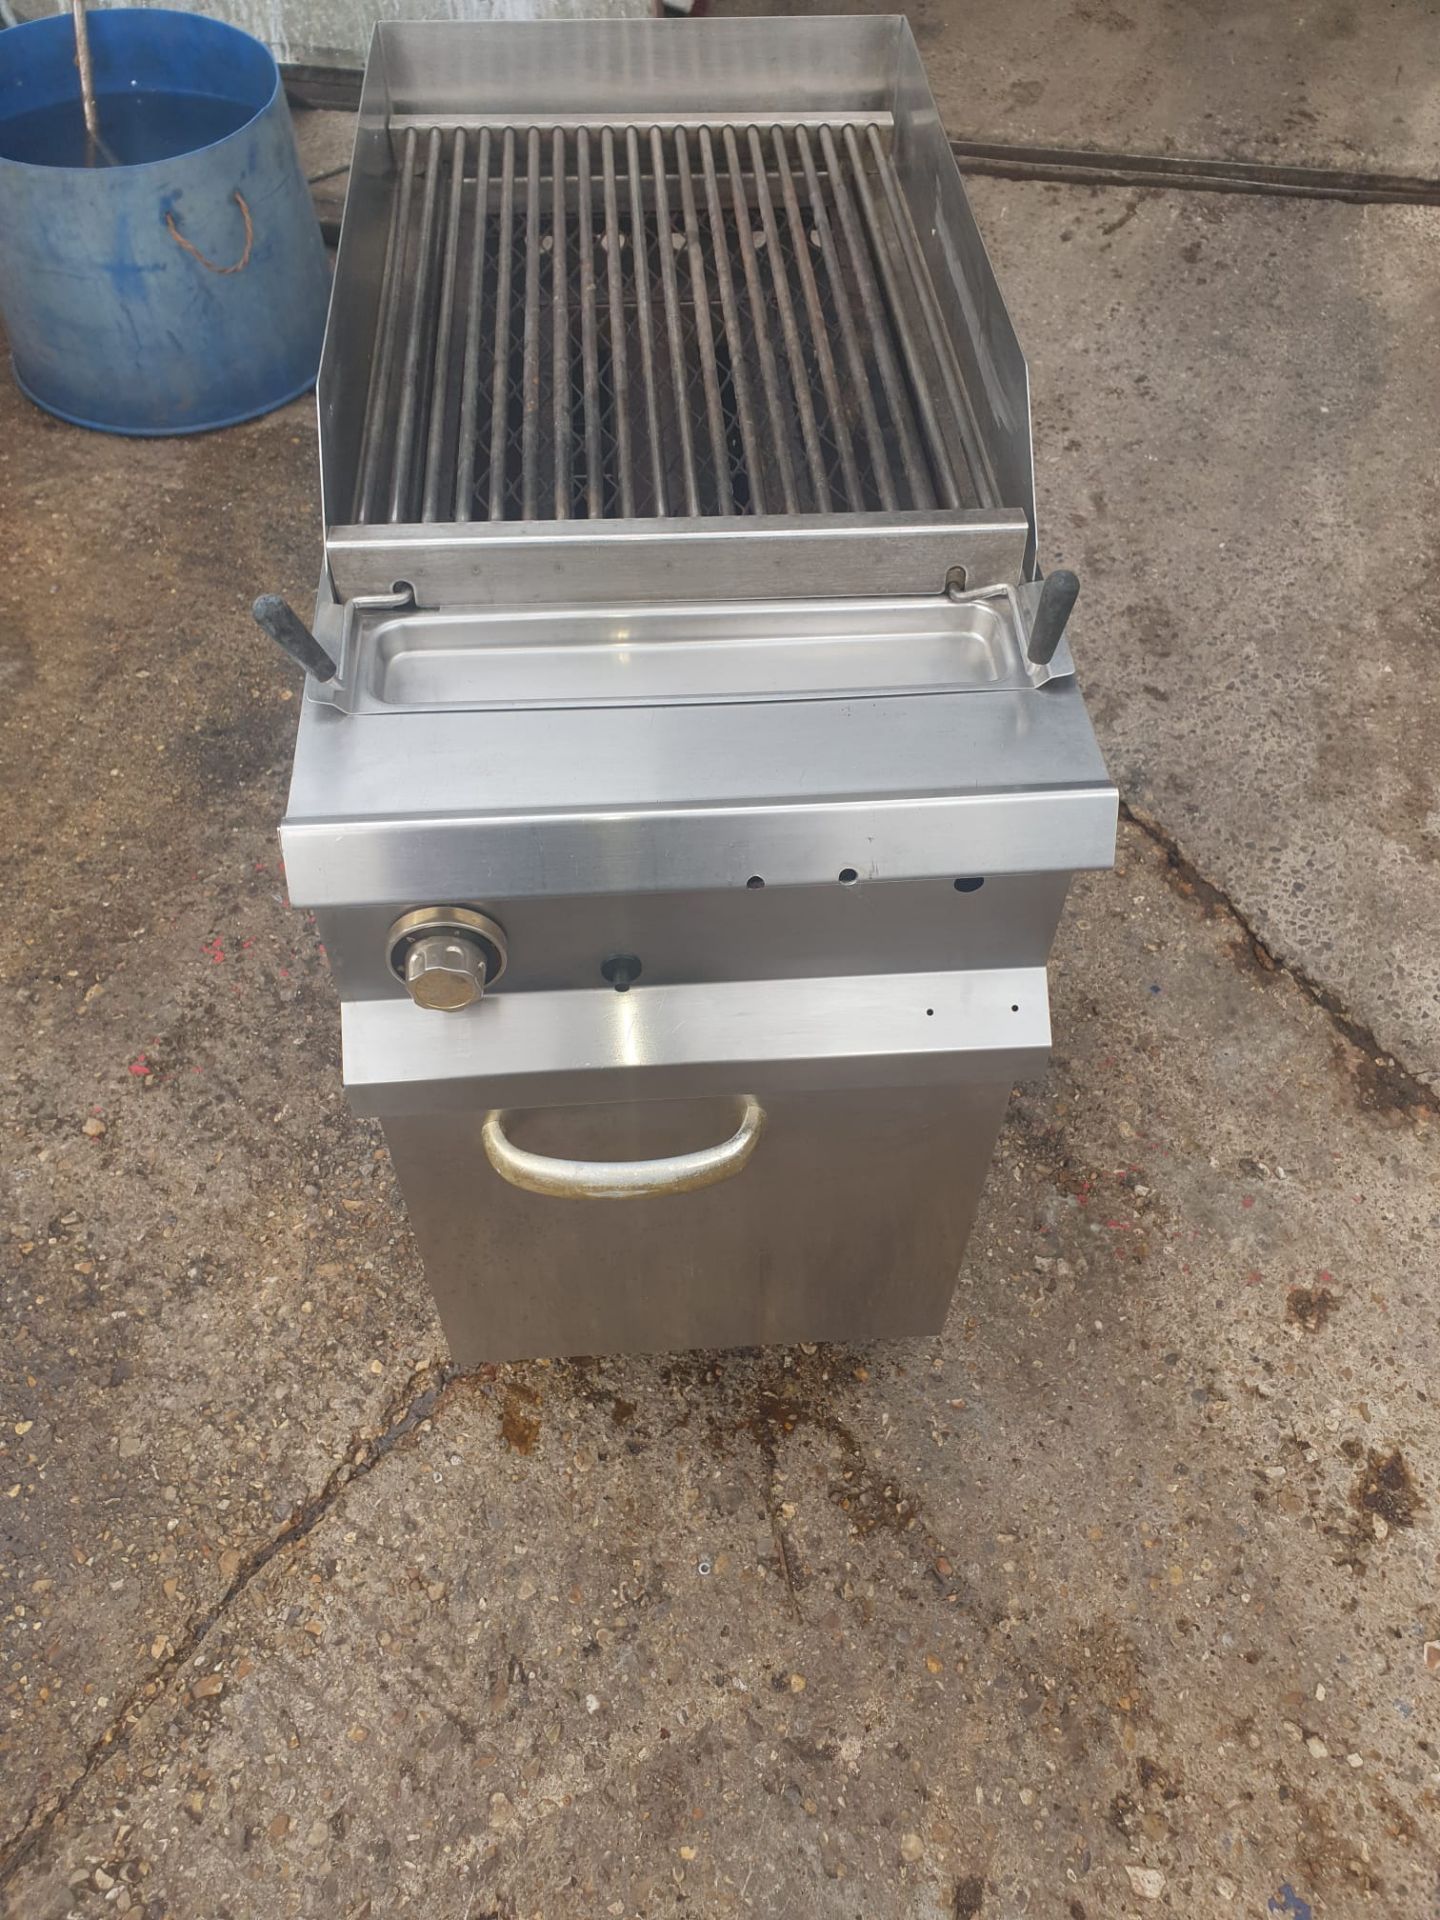 CHARGRILL 450 MM WIDE - FULLY WORKING - NATURAL GAS - Bild 3 aus 4